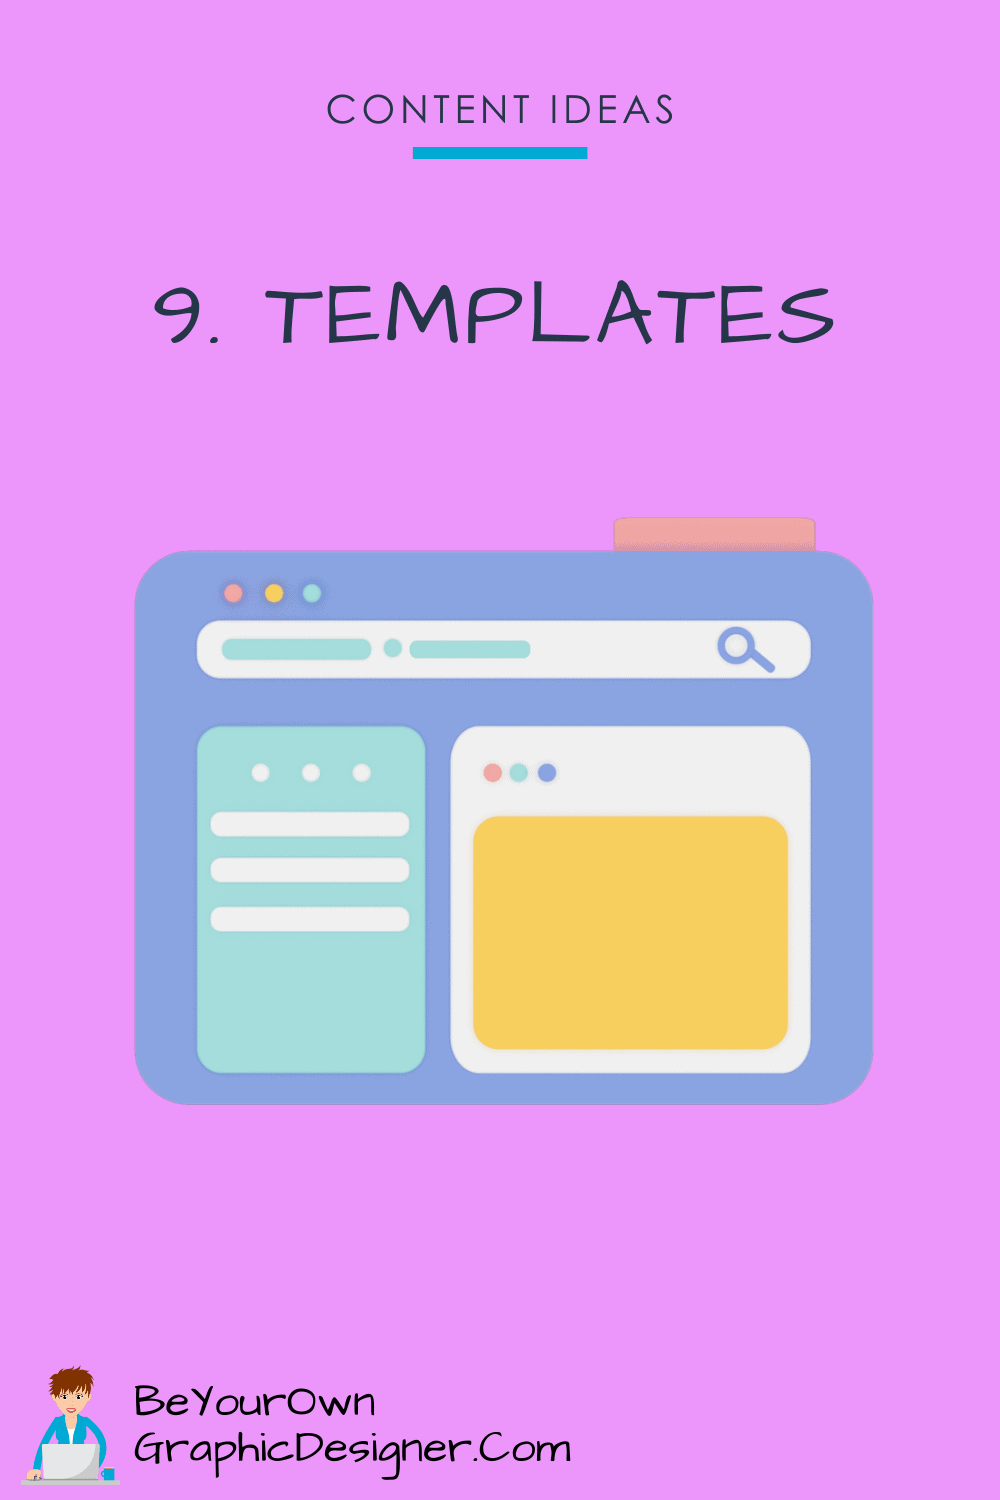 Template: 100+ Content Ideas and Inspiration for August 2022